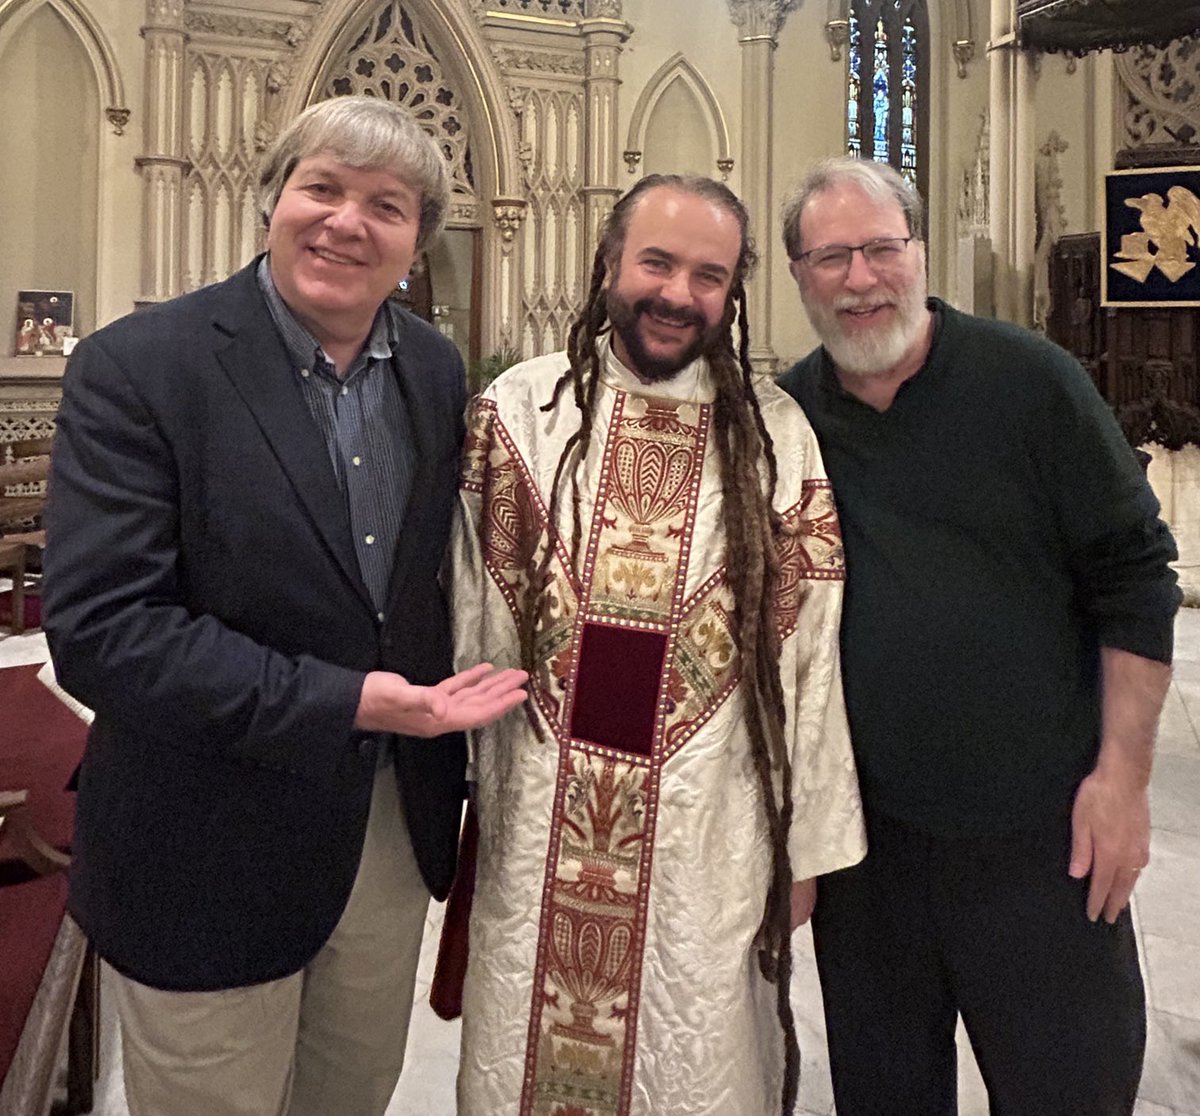 So enjoyed hearing my friend and author ⁦@frjohndear⁩ speak about his new book “The Gospel of Peace” at the Episcopal cathedral in Garden City NJ with our friend ⁦@AdamBucko⁩